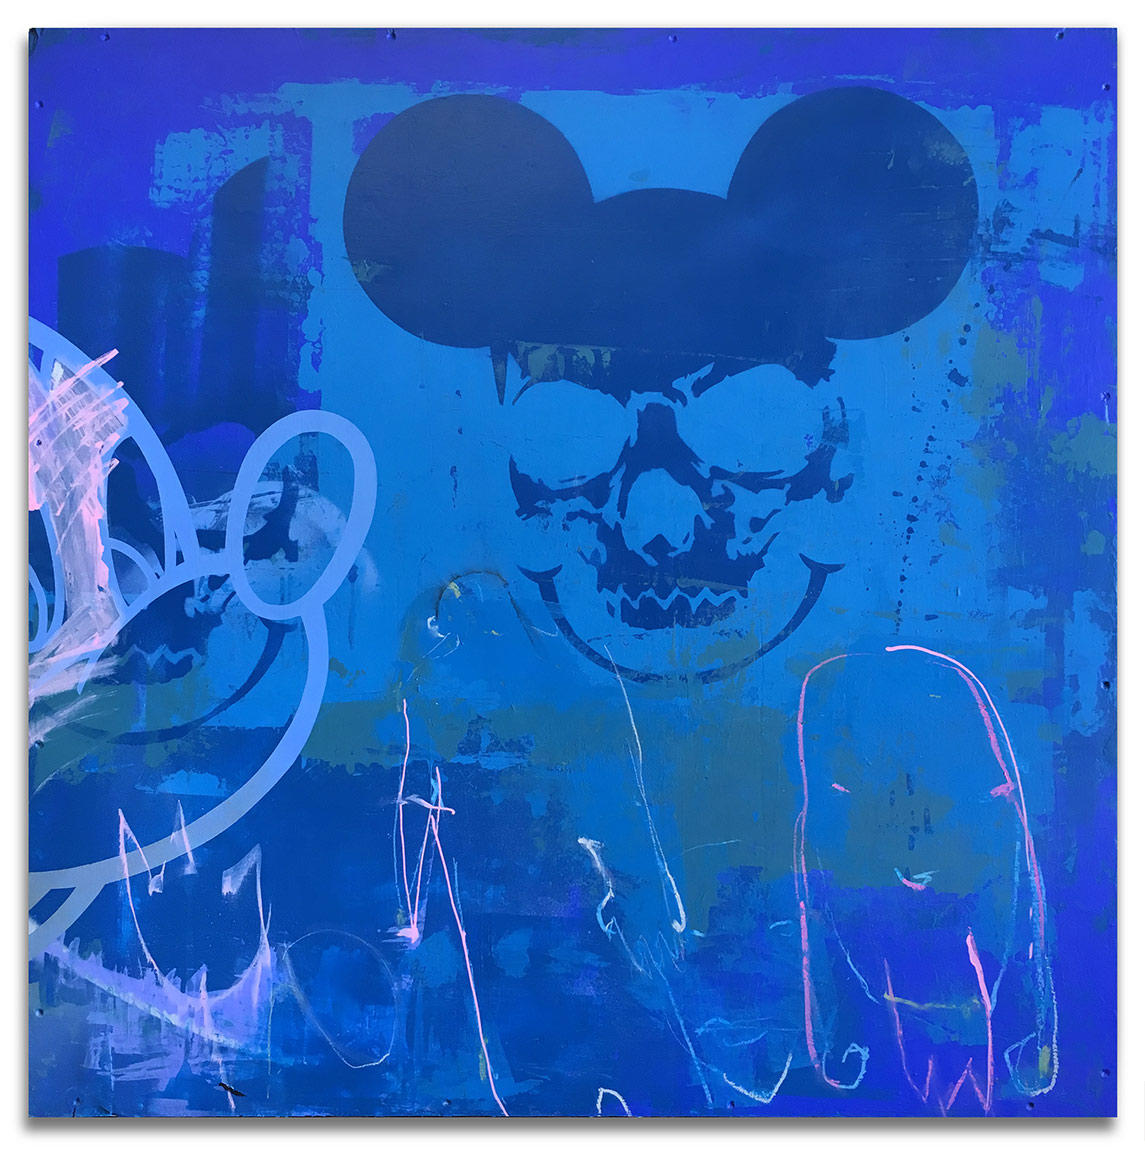 Mickey Mask 03 - 29" x 29" Acrylics, spray cans, oil pastel on wood, industrial wire spool box.